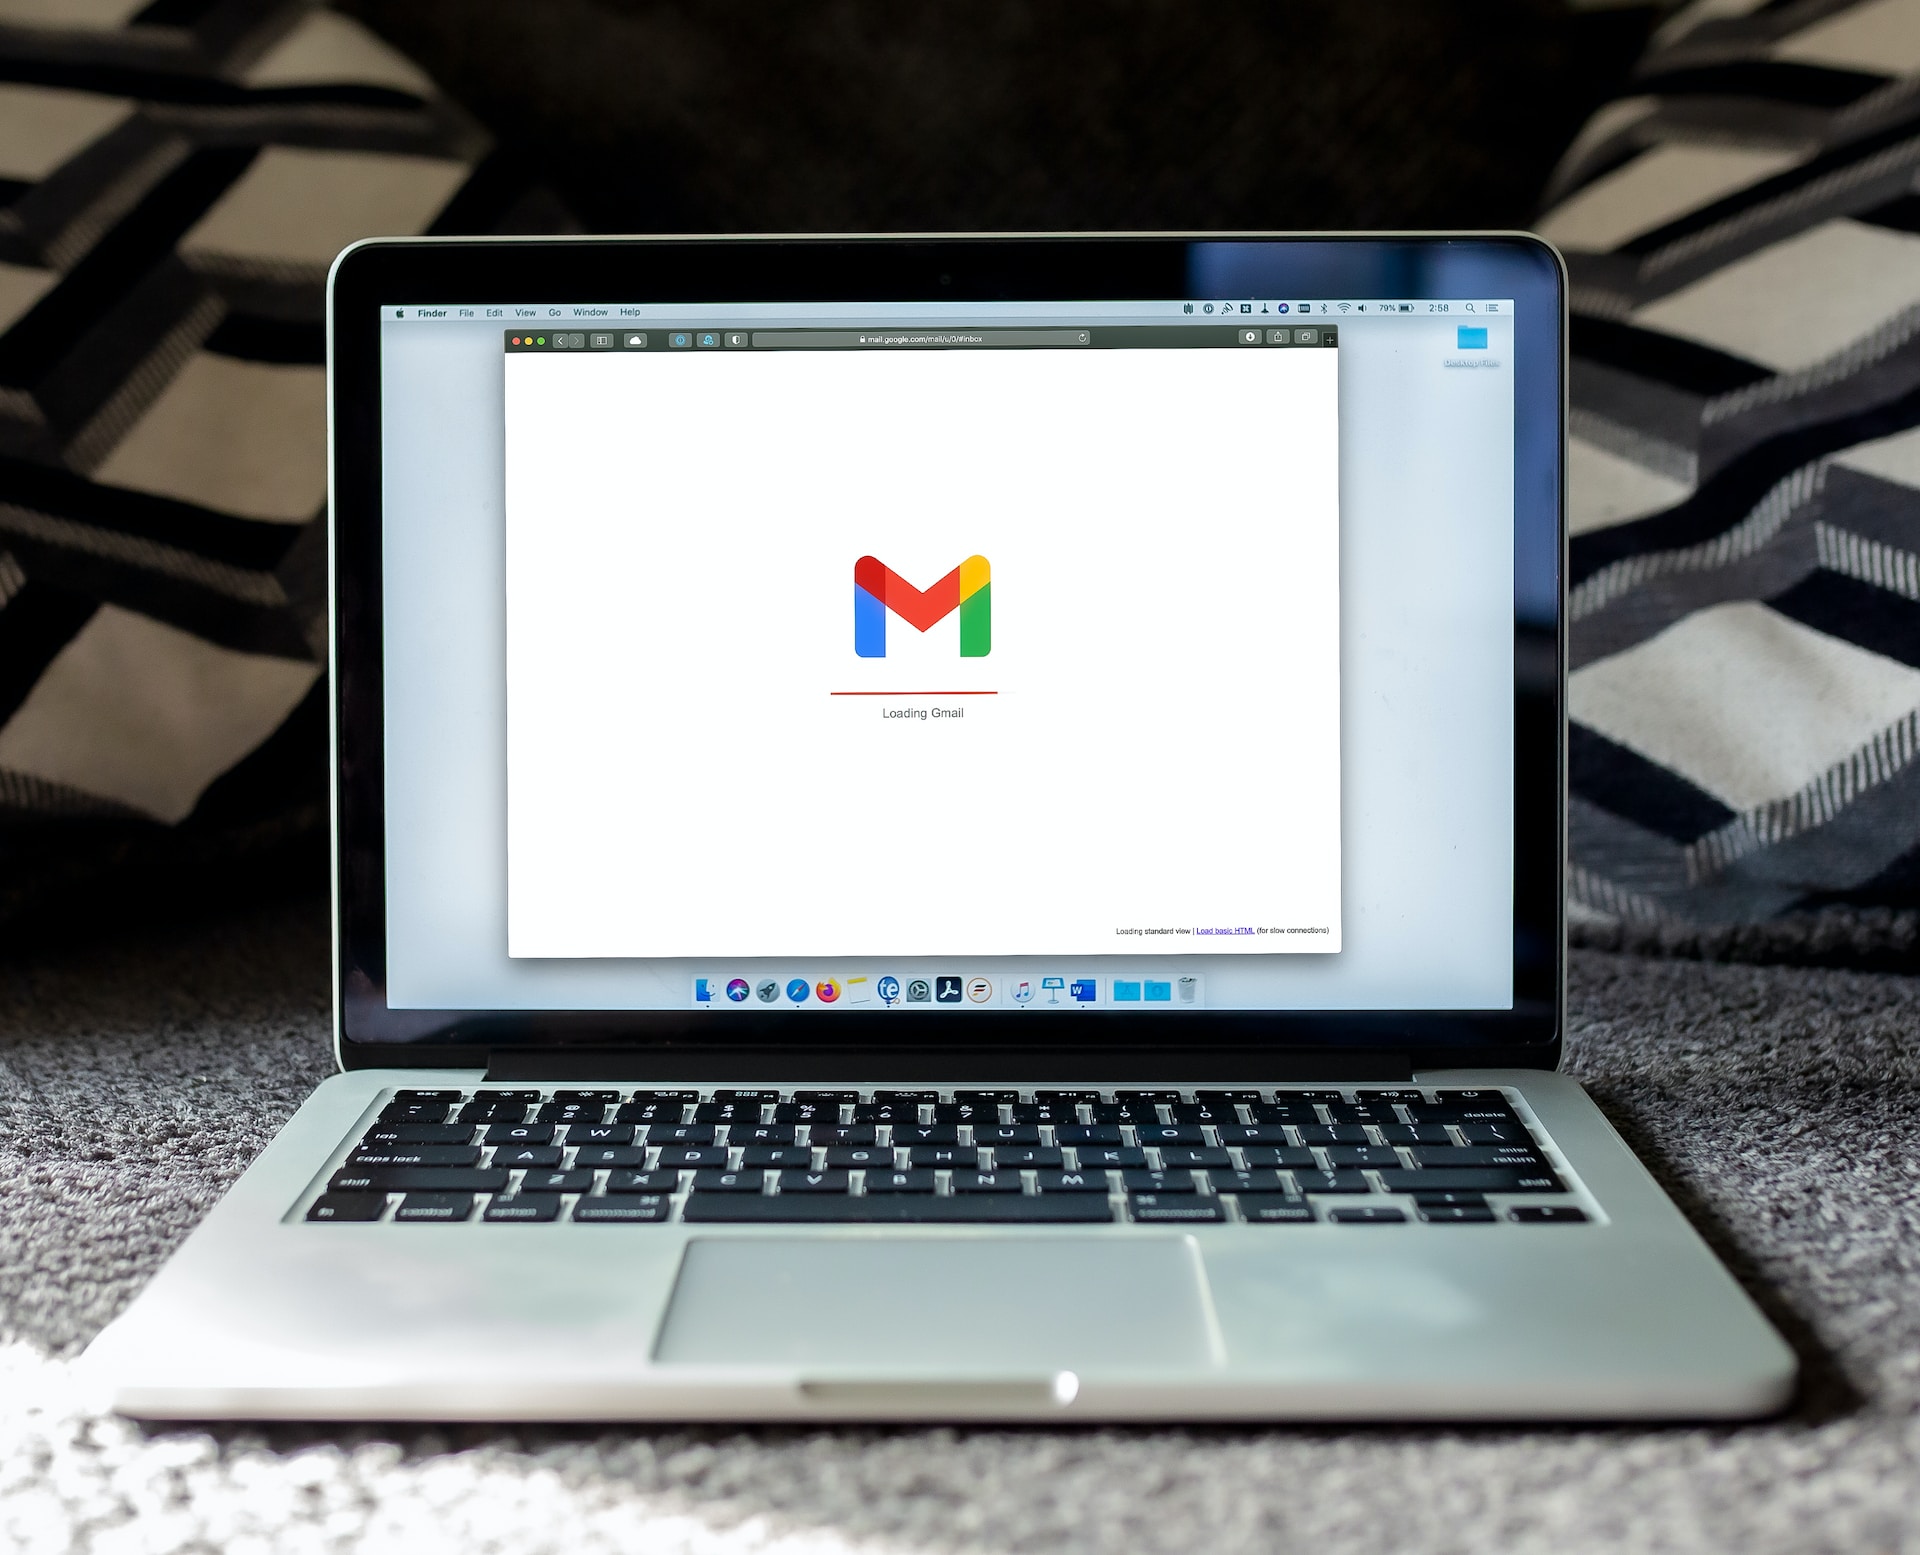 A Macbook on which Gmail is accessed